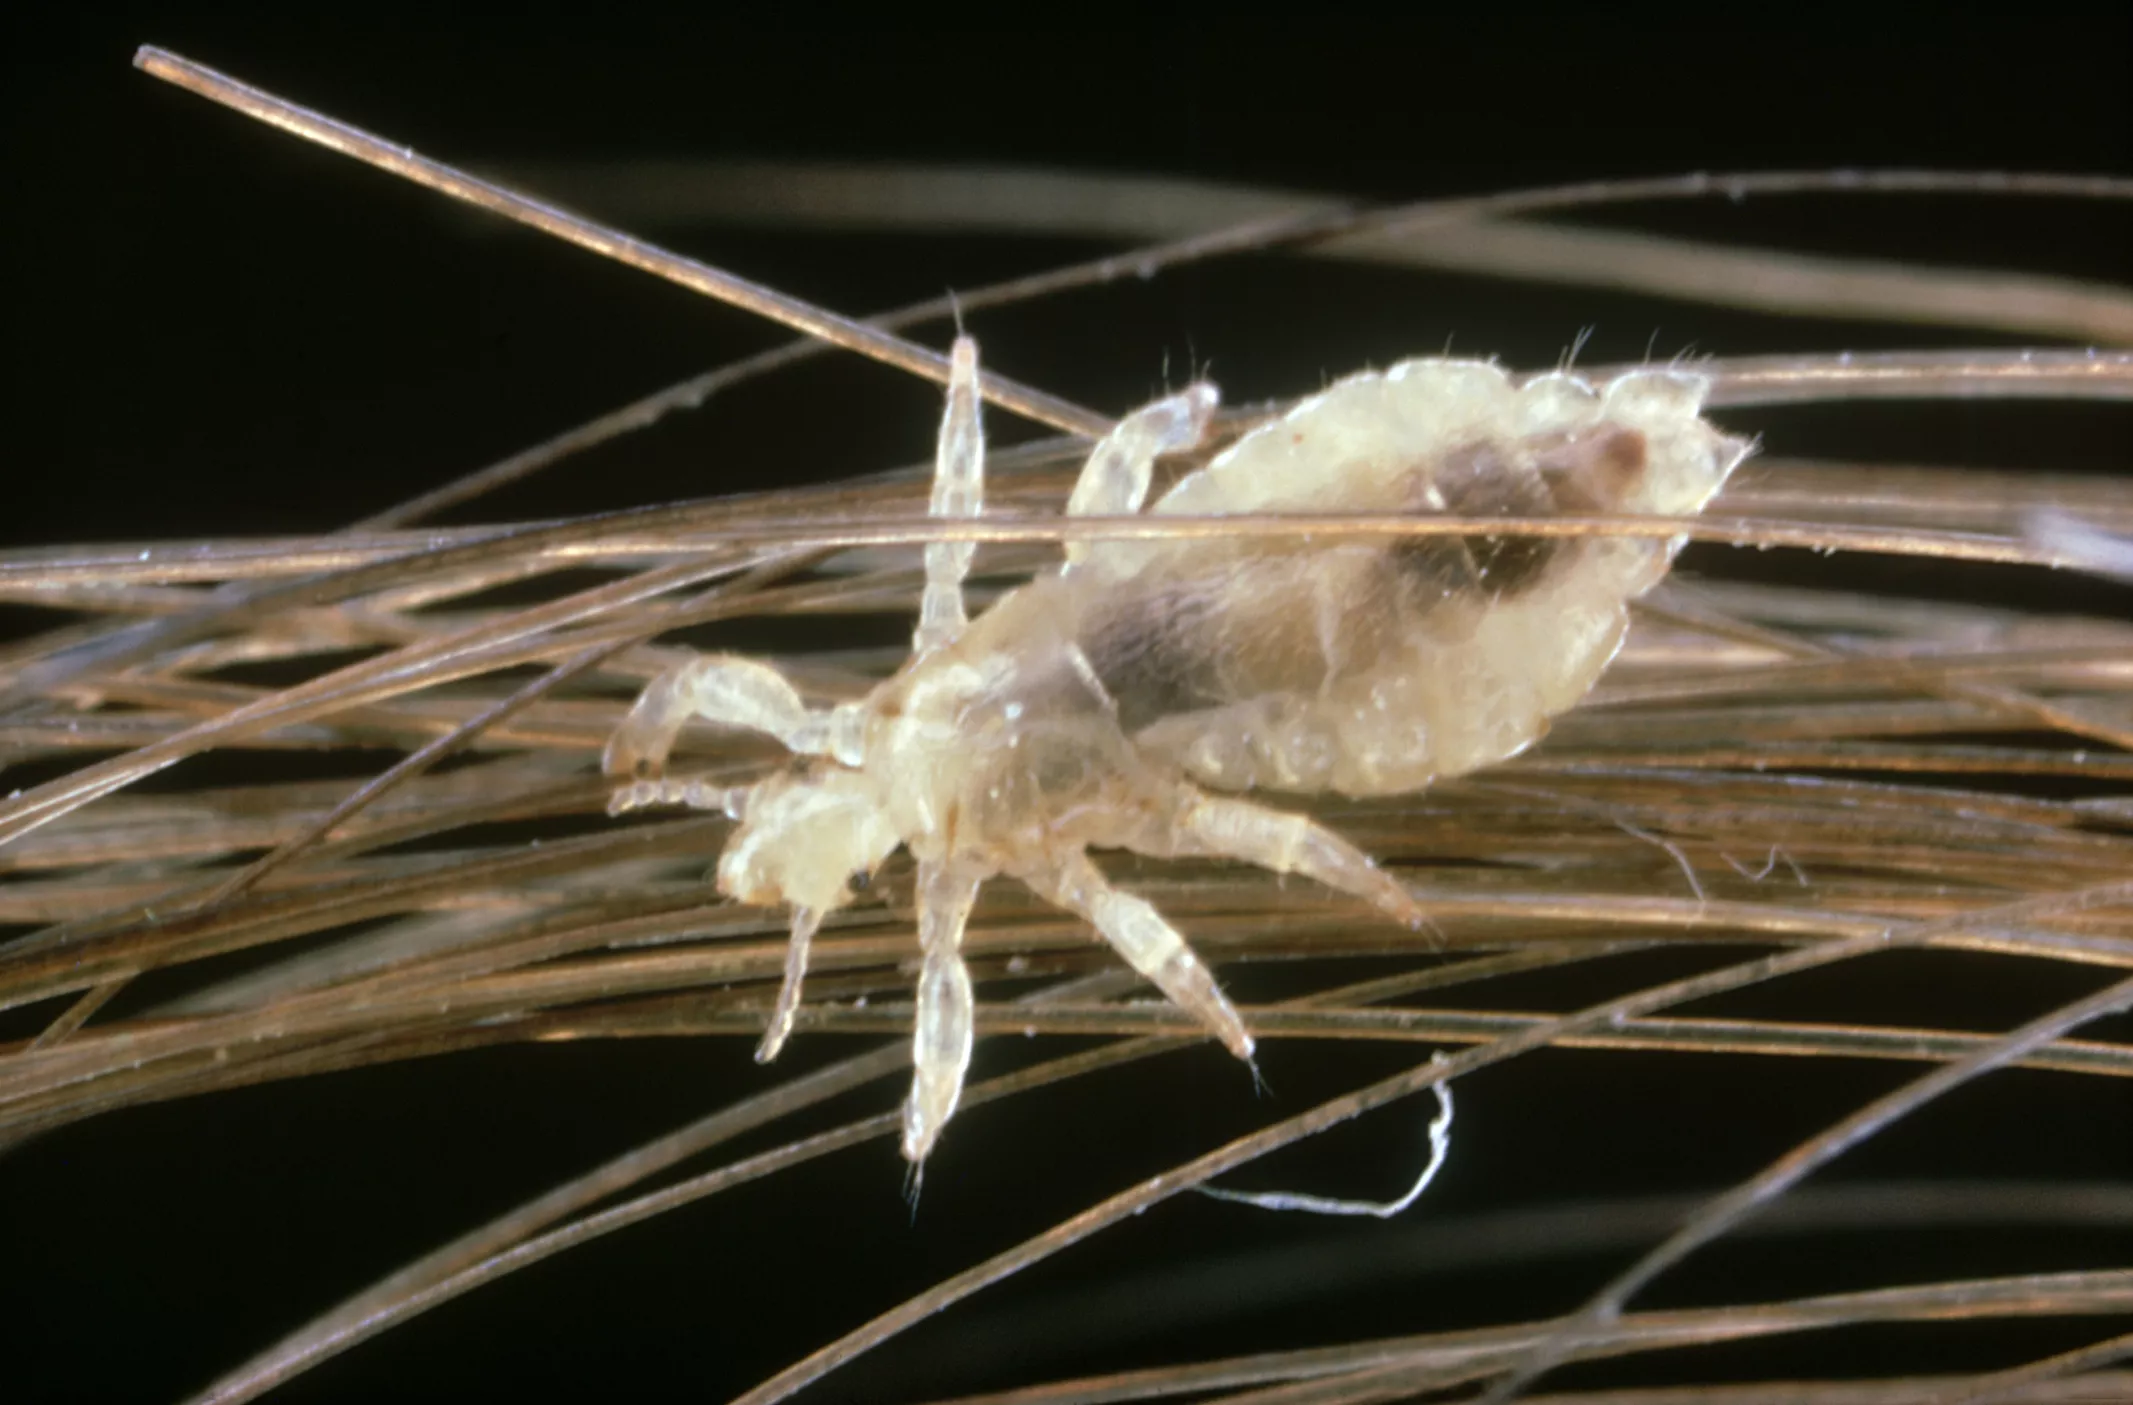 A close-up photo of a louse on hair